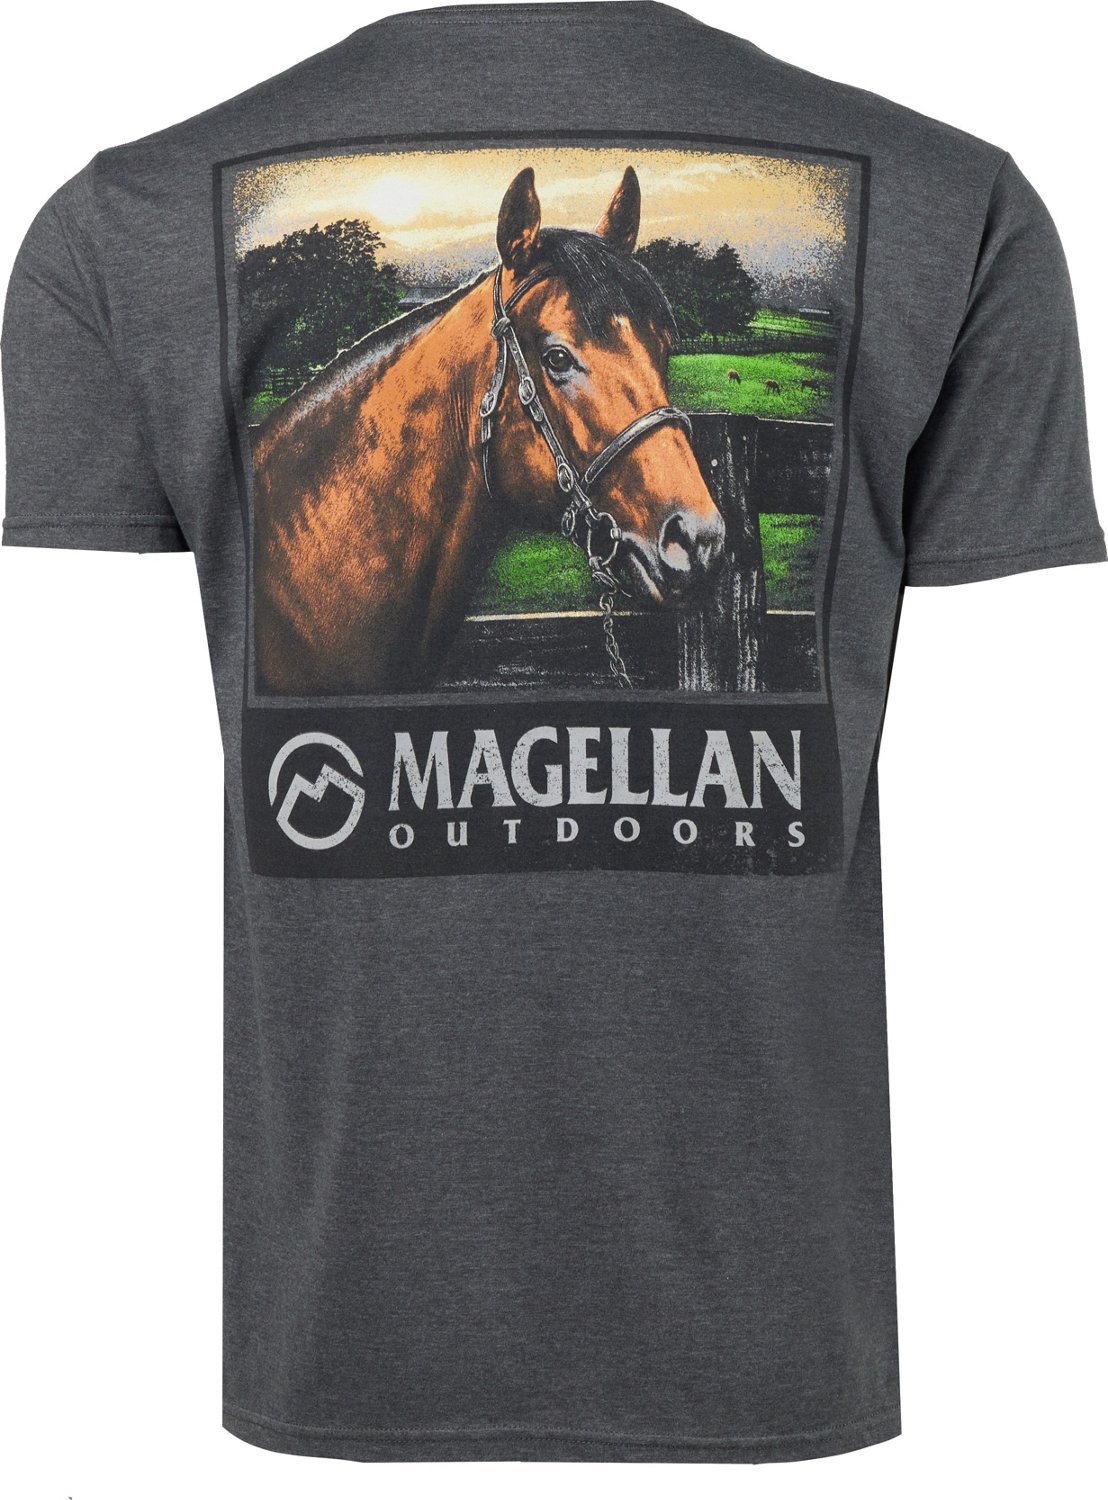 Academy Sports + Outdoors Magellan Outdoors Men's Thoroughbred Graphic  T-shirt